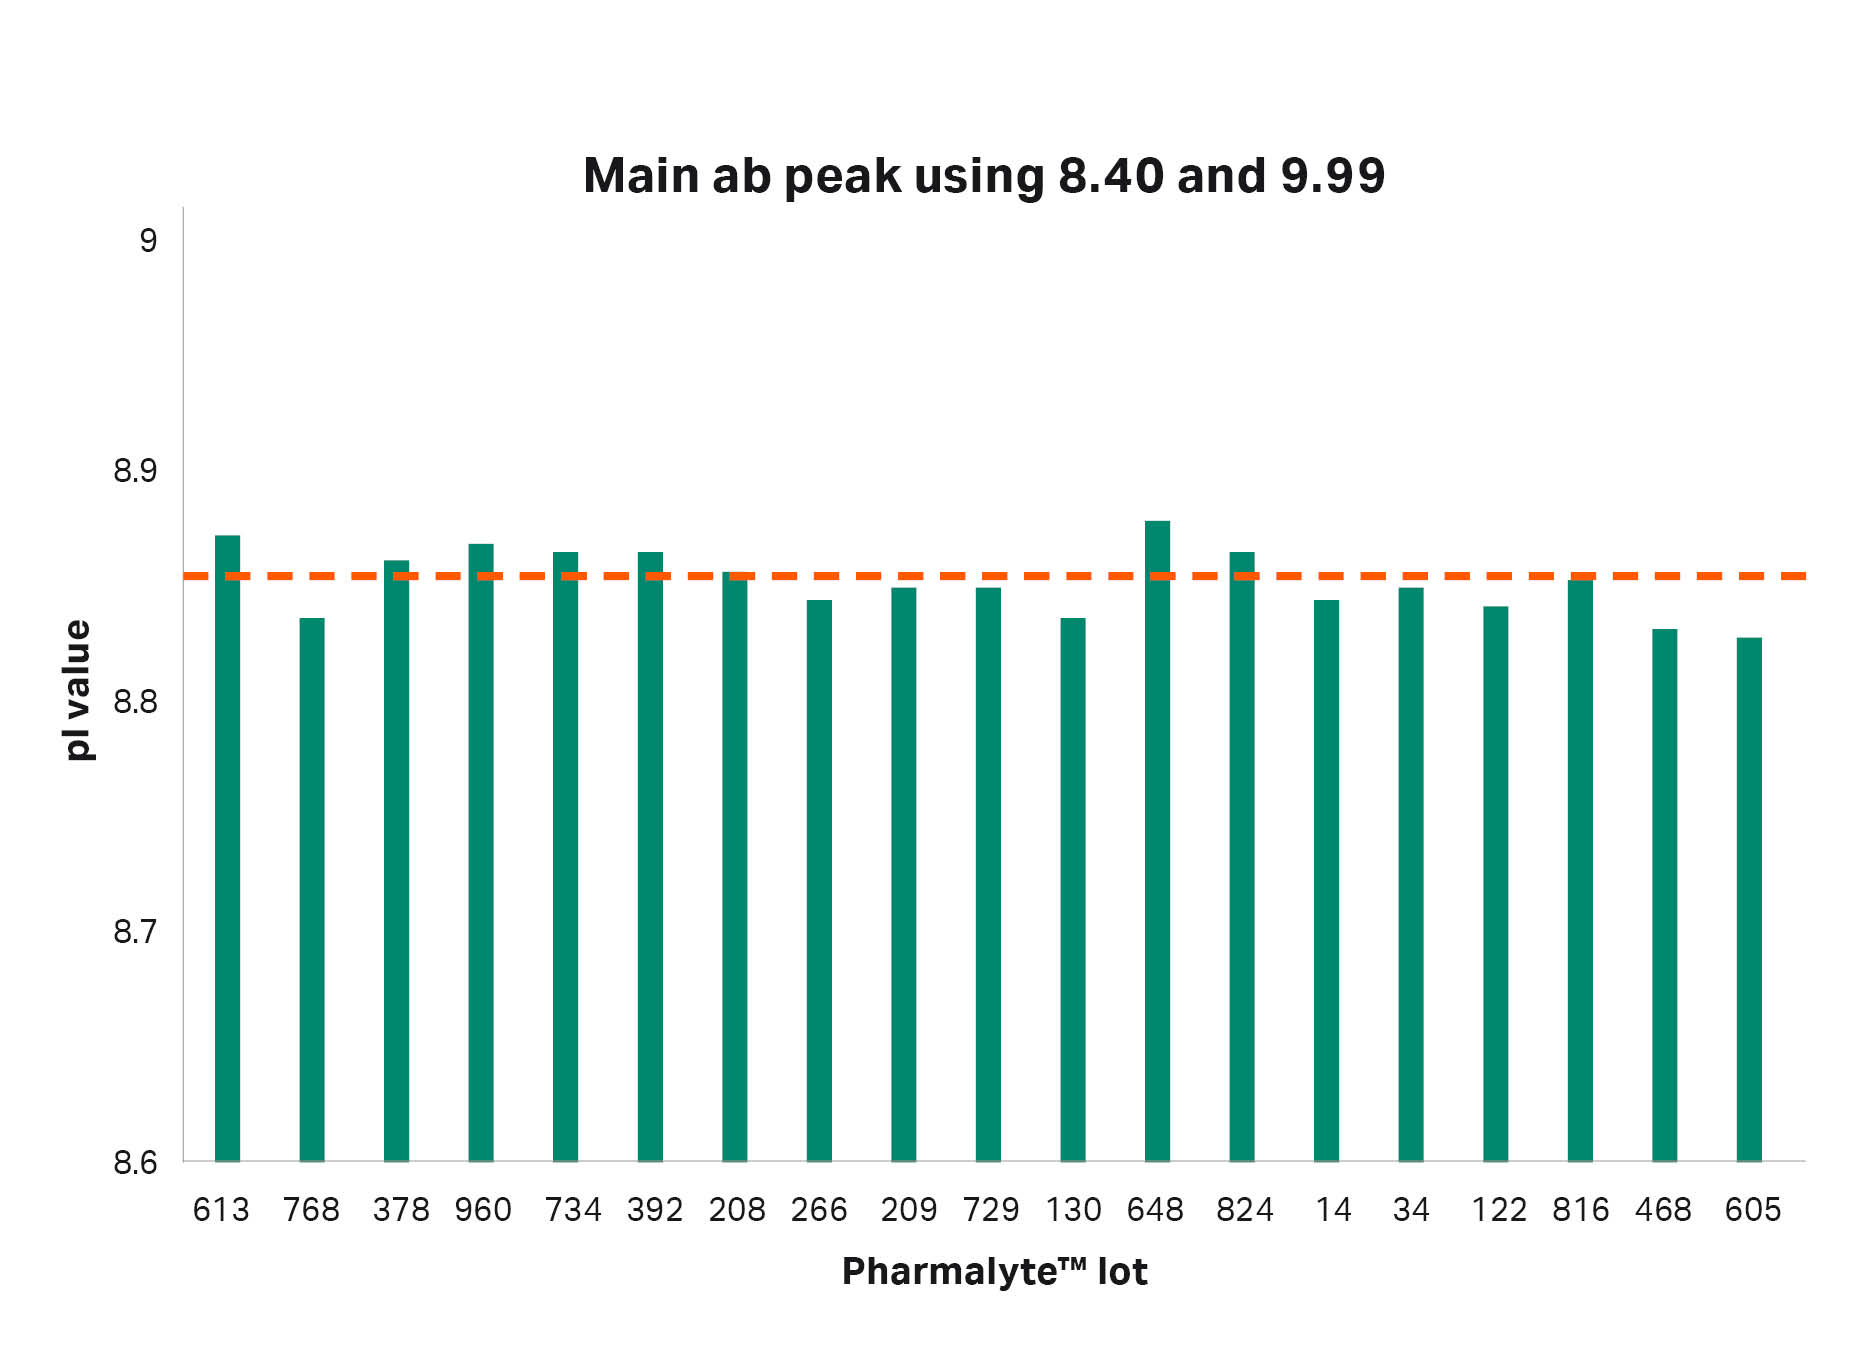 obtained pI values for the main antibody peak when using pI markers 8.4 and 9.99